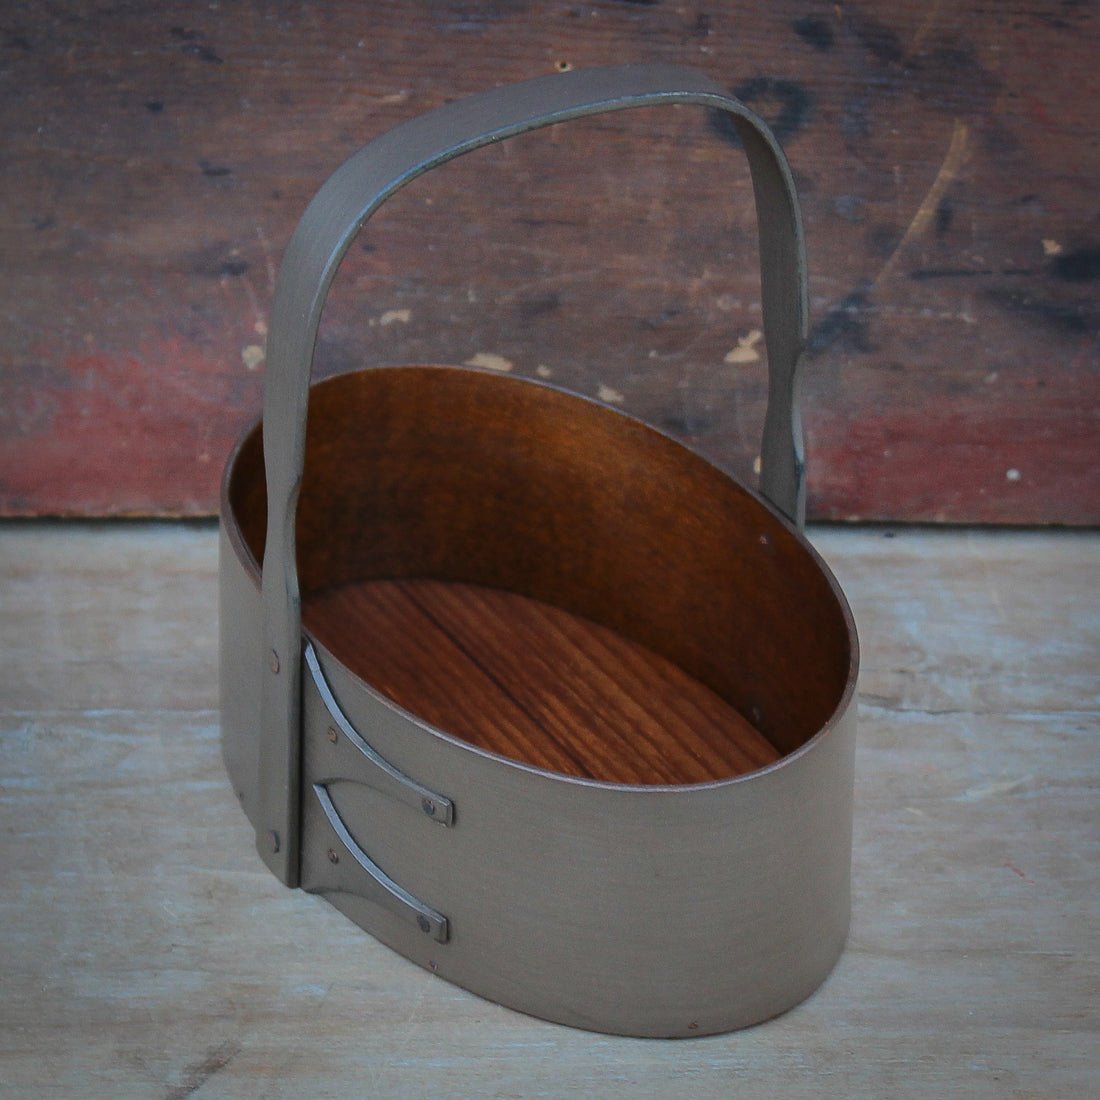 Shaker Carrier, Size #2, LeHays Shaker Boxes, Handcrafted in Maine.  Grey Milk Paint Finish, Side View